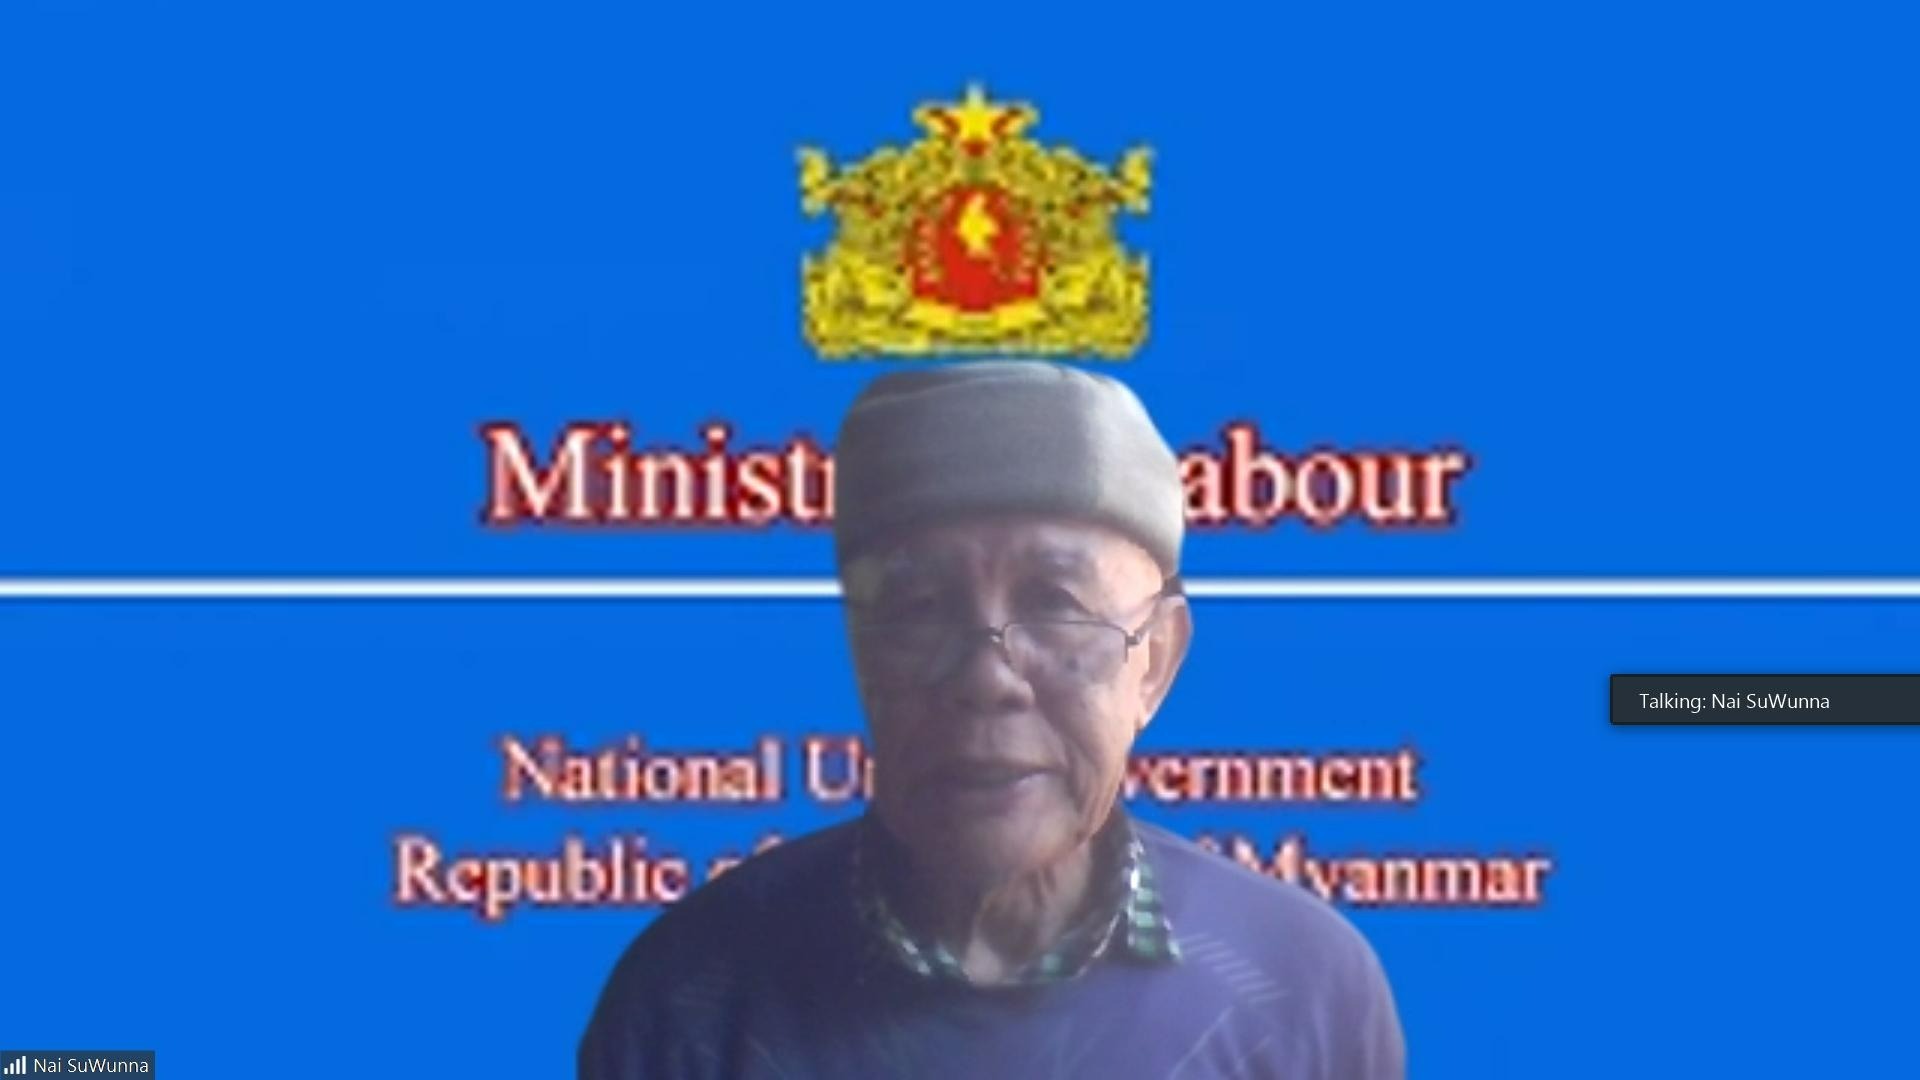 Ministry of Labour https://mol.nugmyanmar.org/my/activities/meeting-with-myanmar-migrant-workers-committee-thailand-to-discuss-labor-issues/